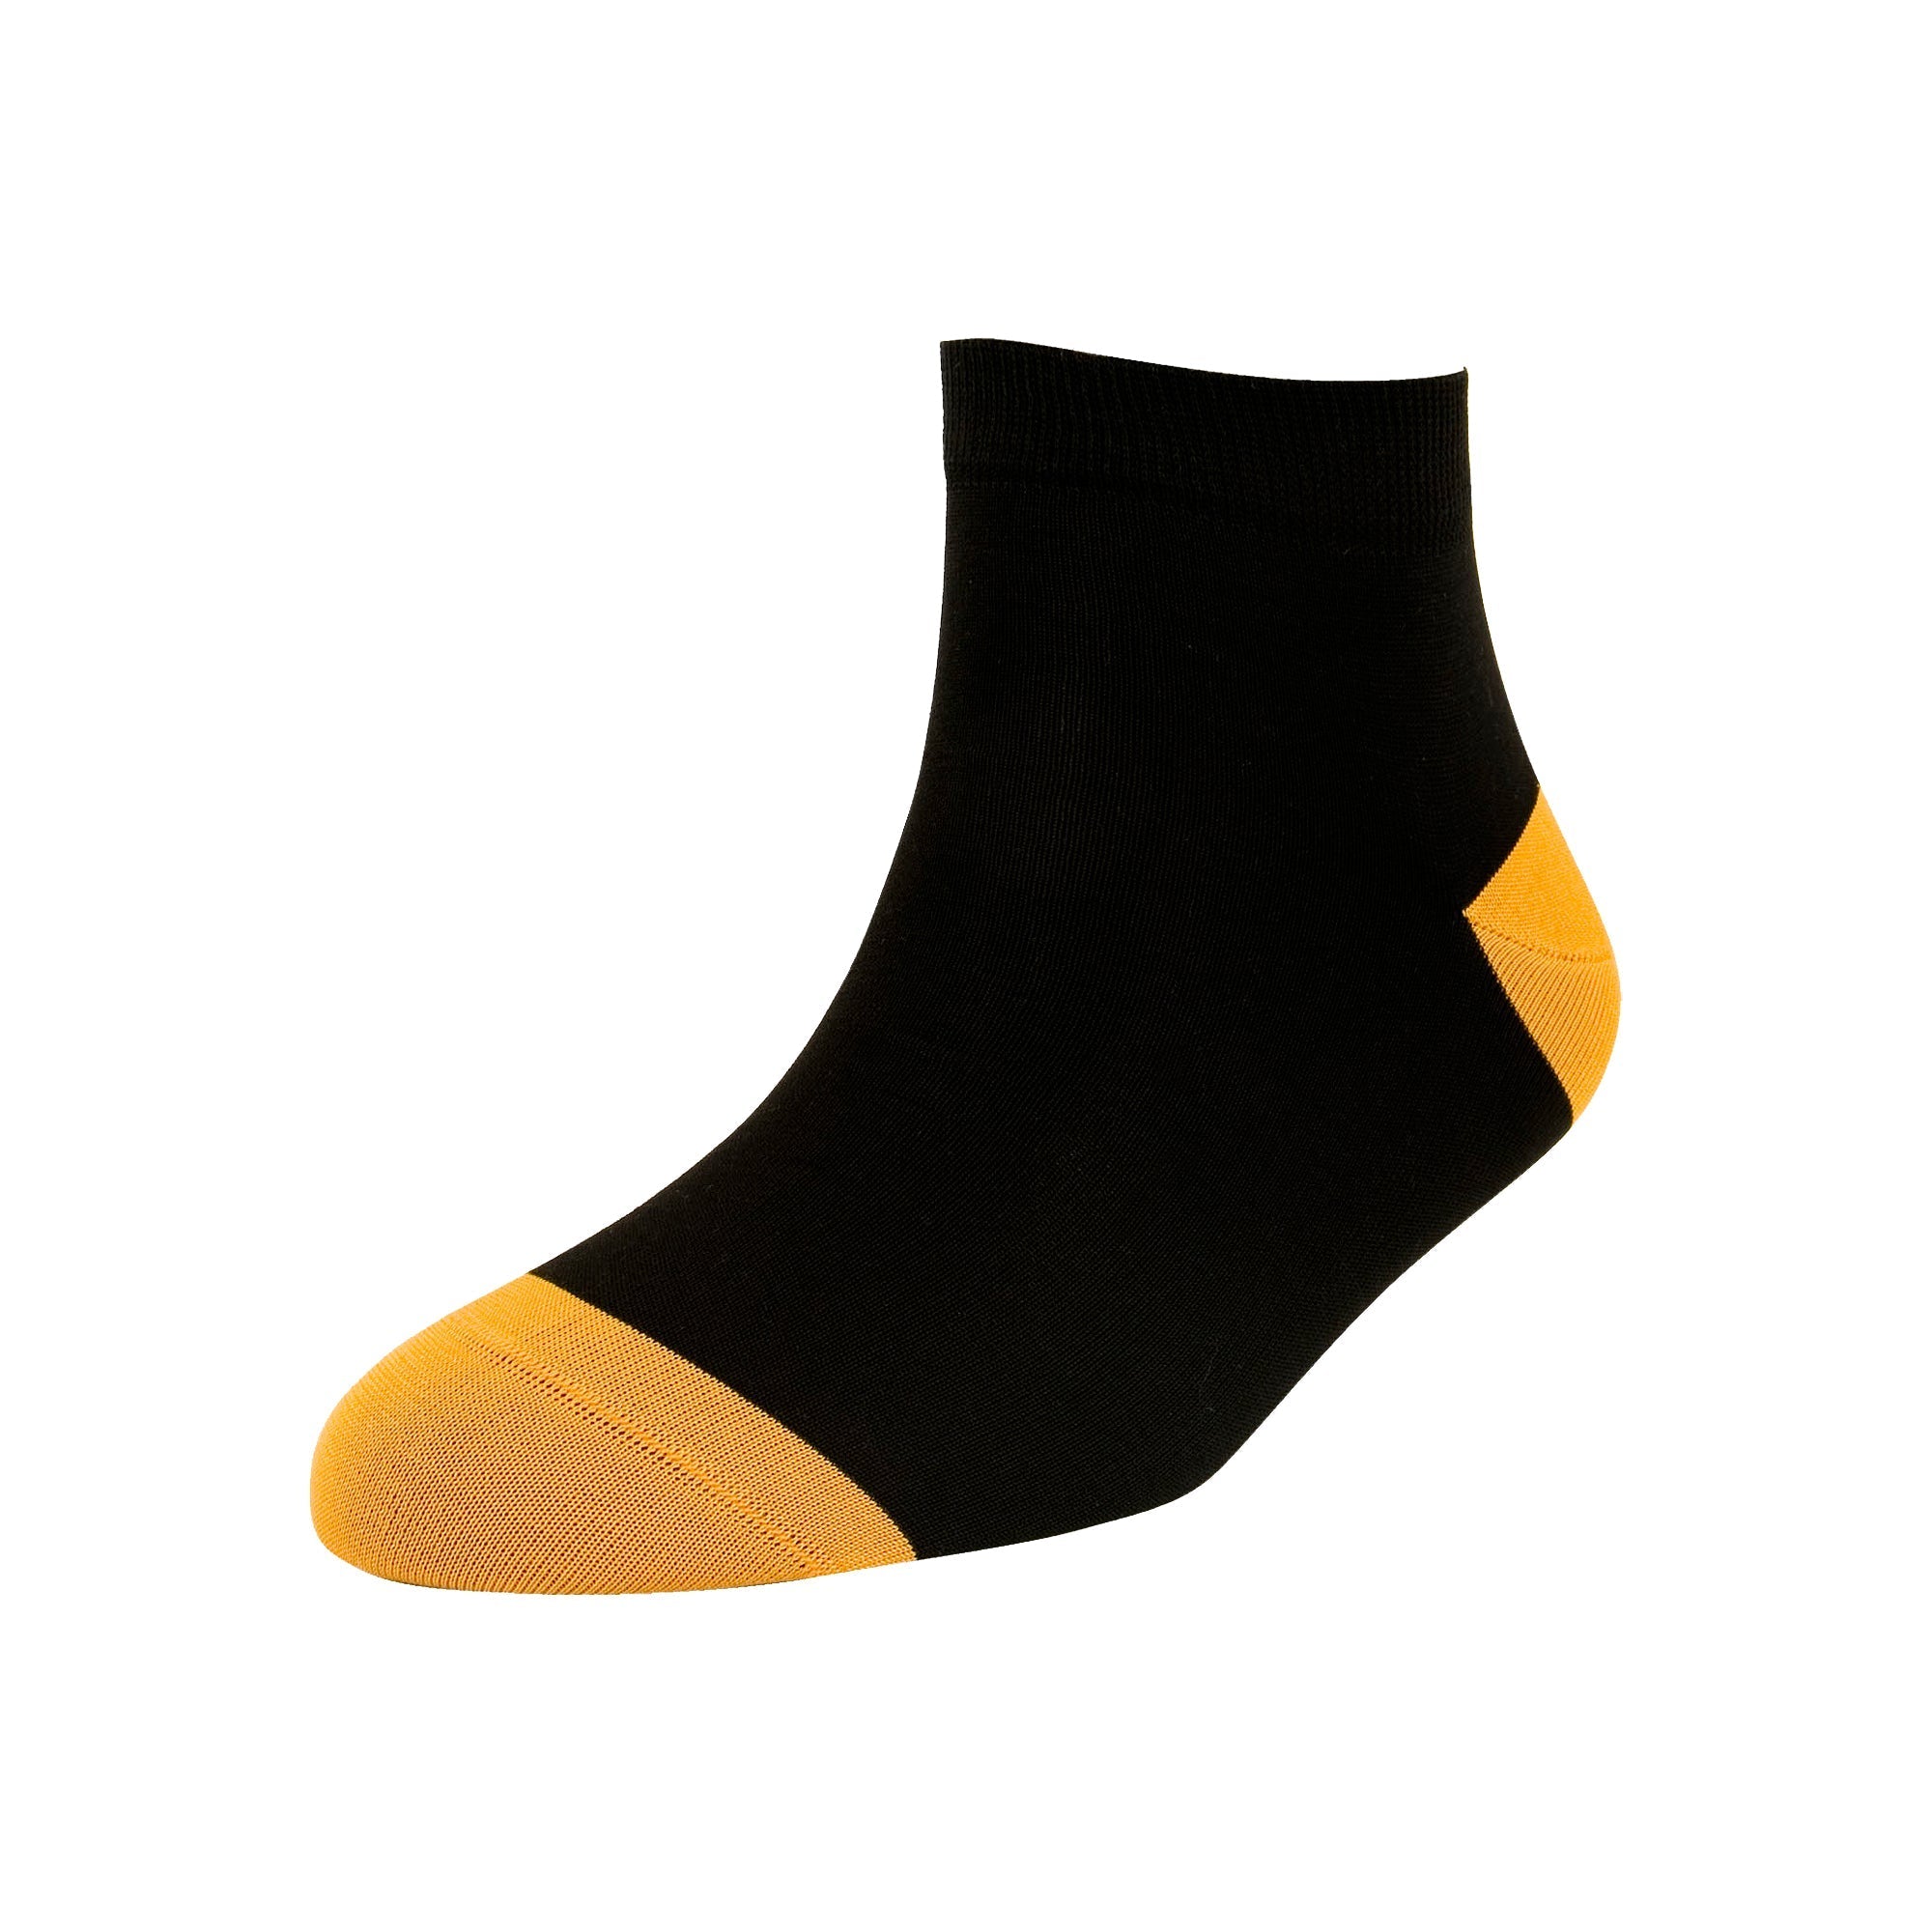 Men's Fashion Heal and Toe Ankle Socks